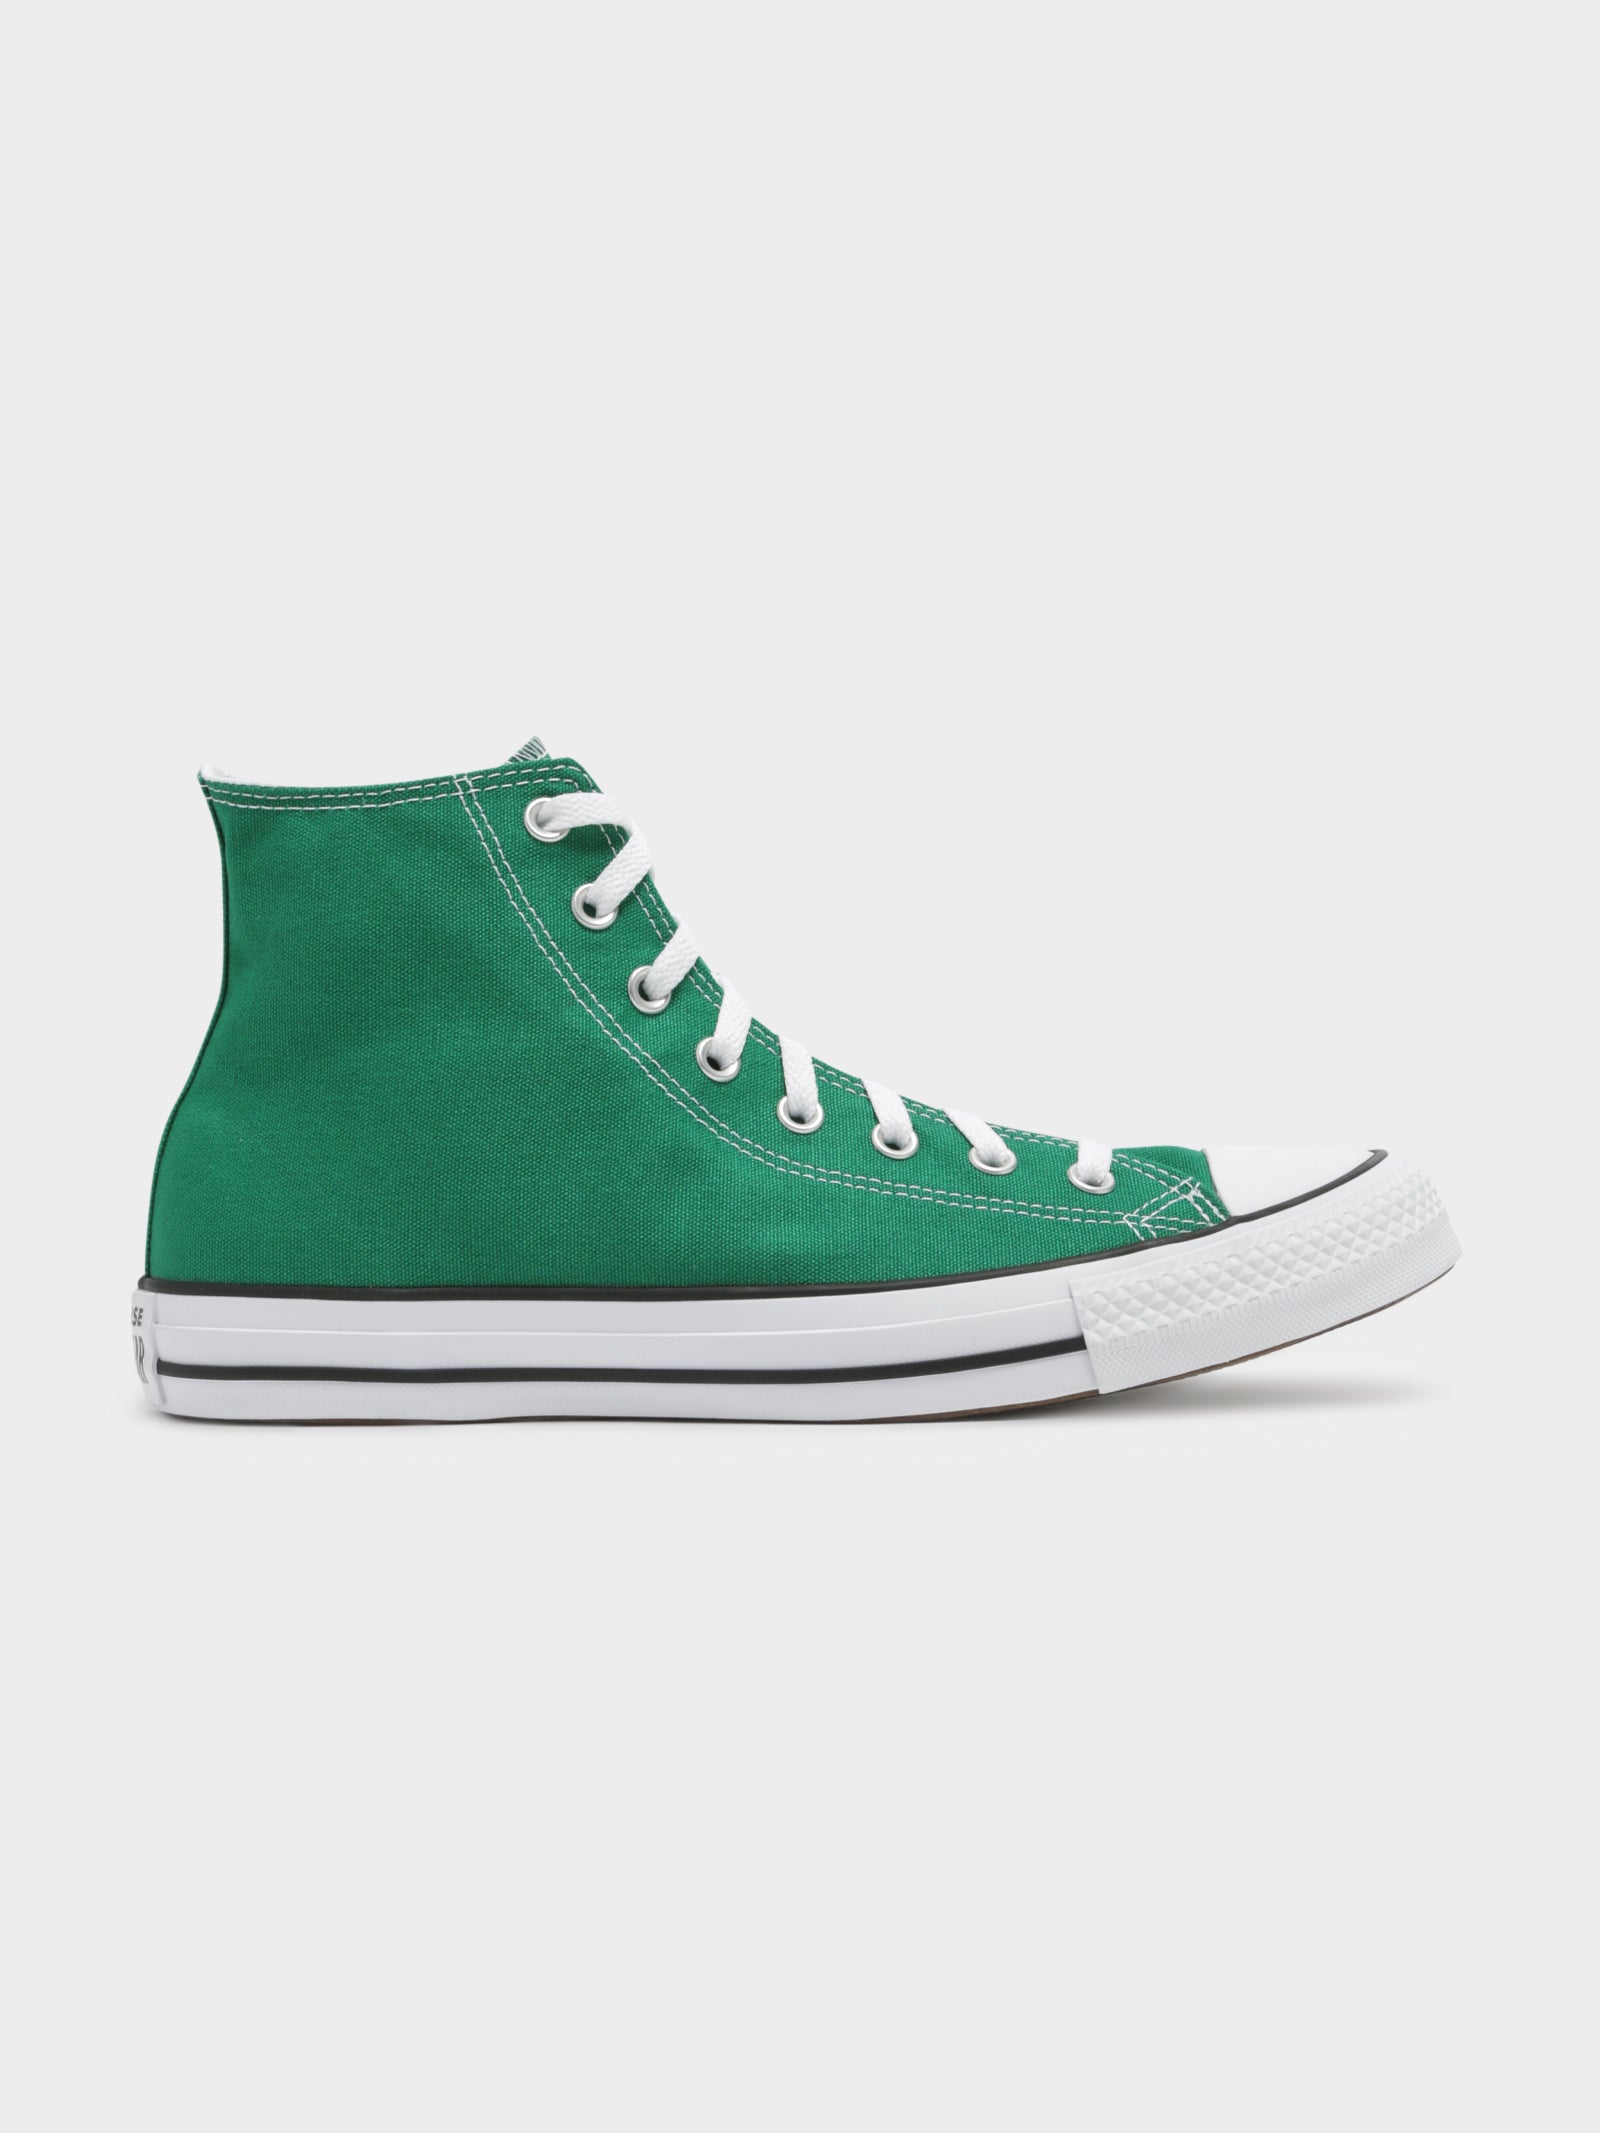 Unisex Chuck Taylor All Star High Sneakers in Amazon - Store